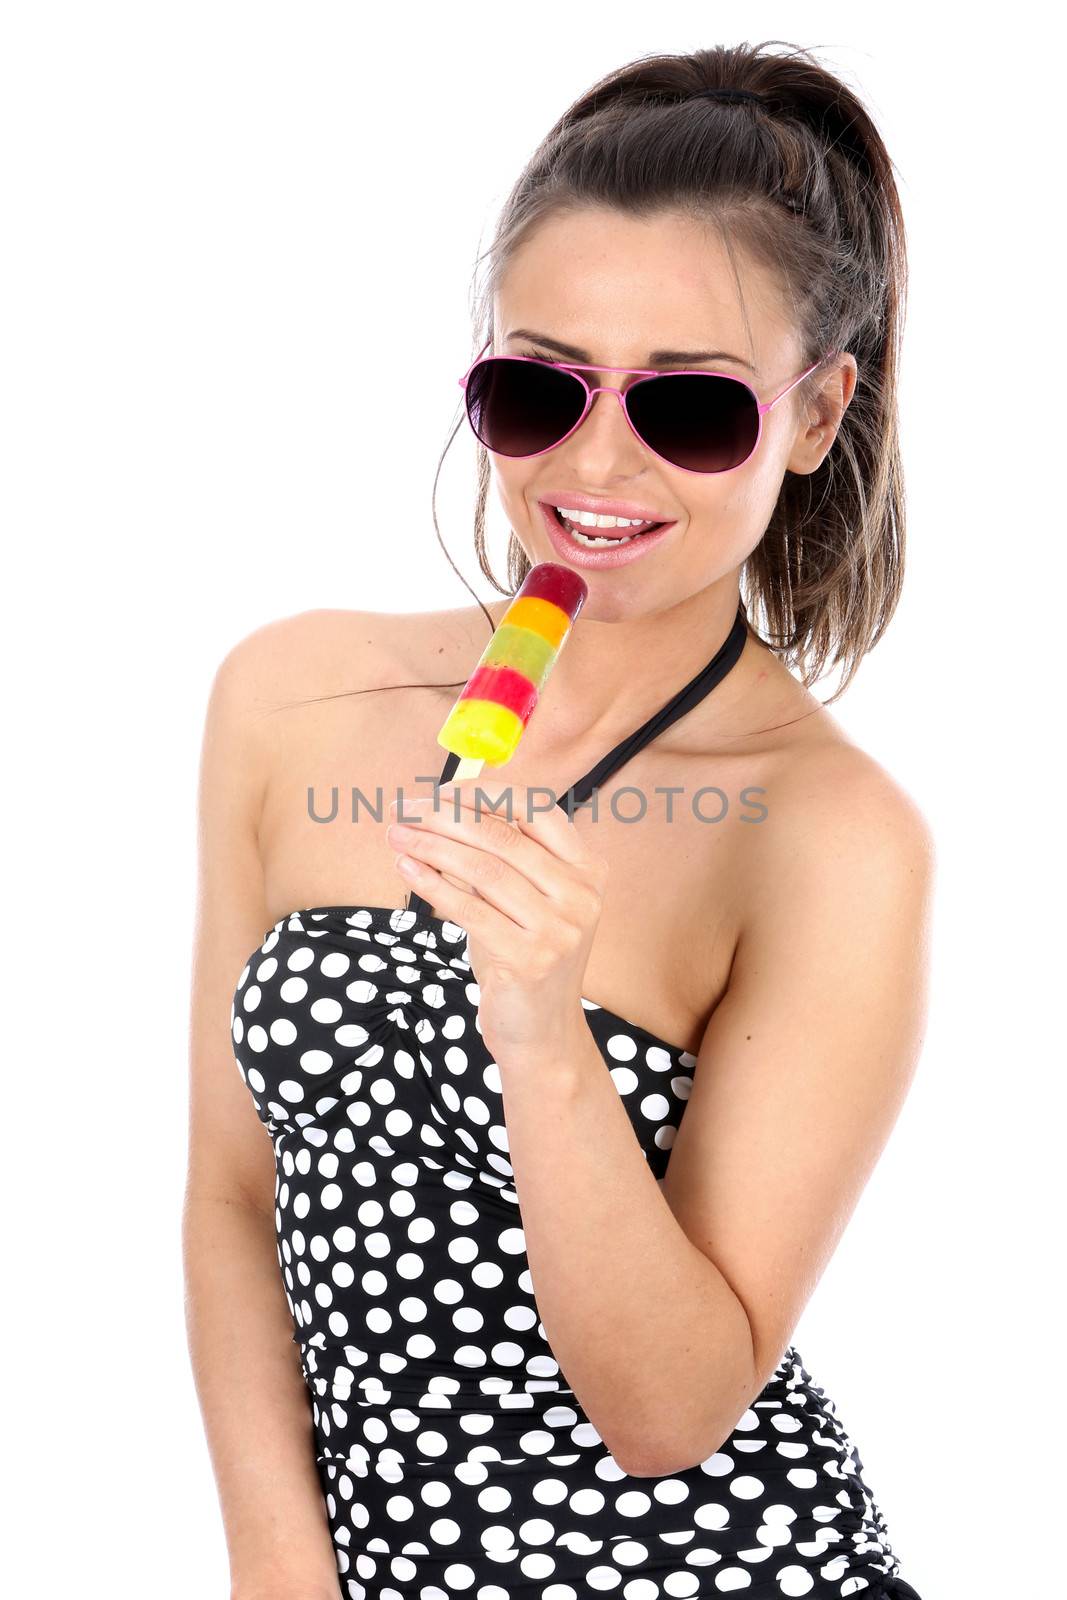 Model Released. Woman Eating Ice lolly by Whiteboxmedia